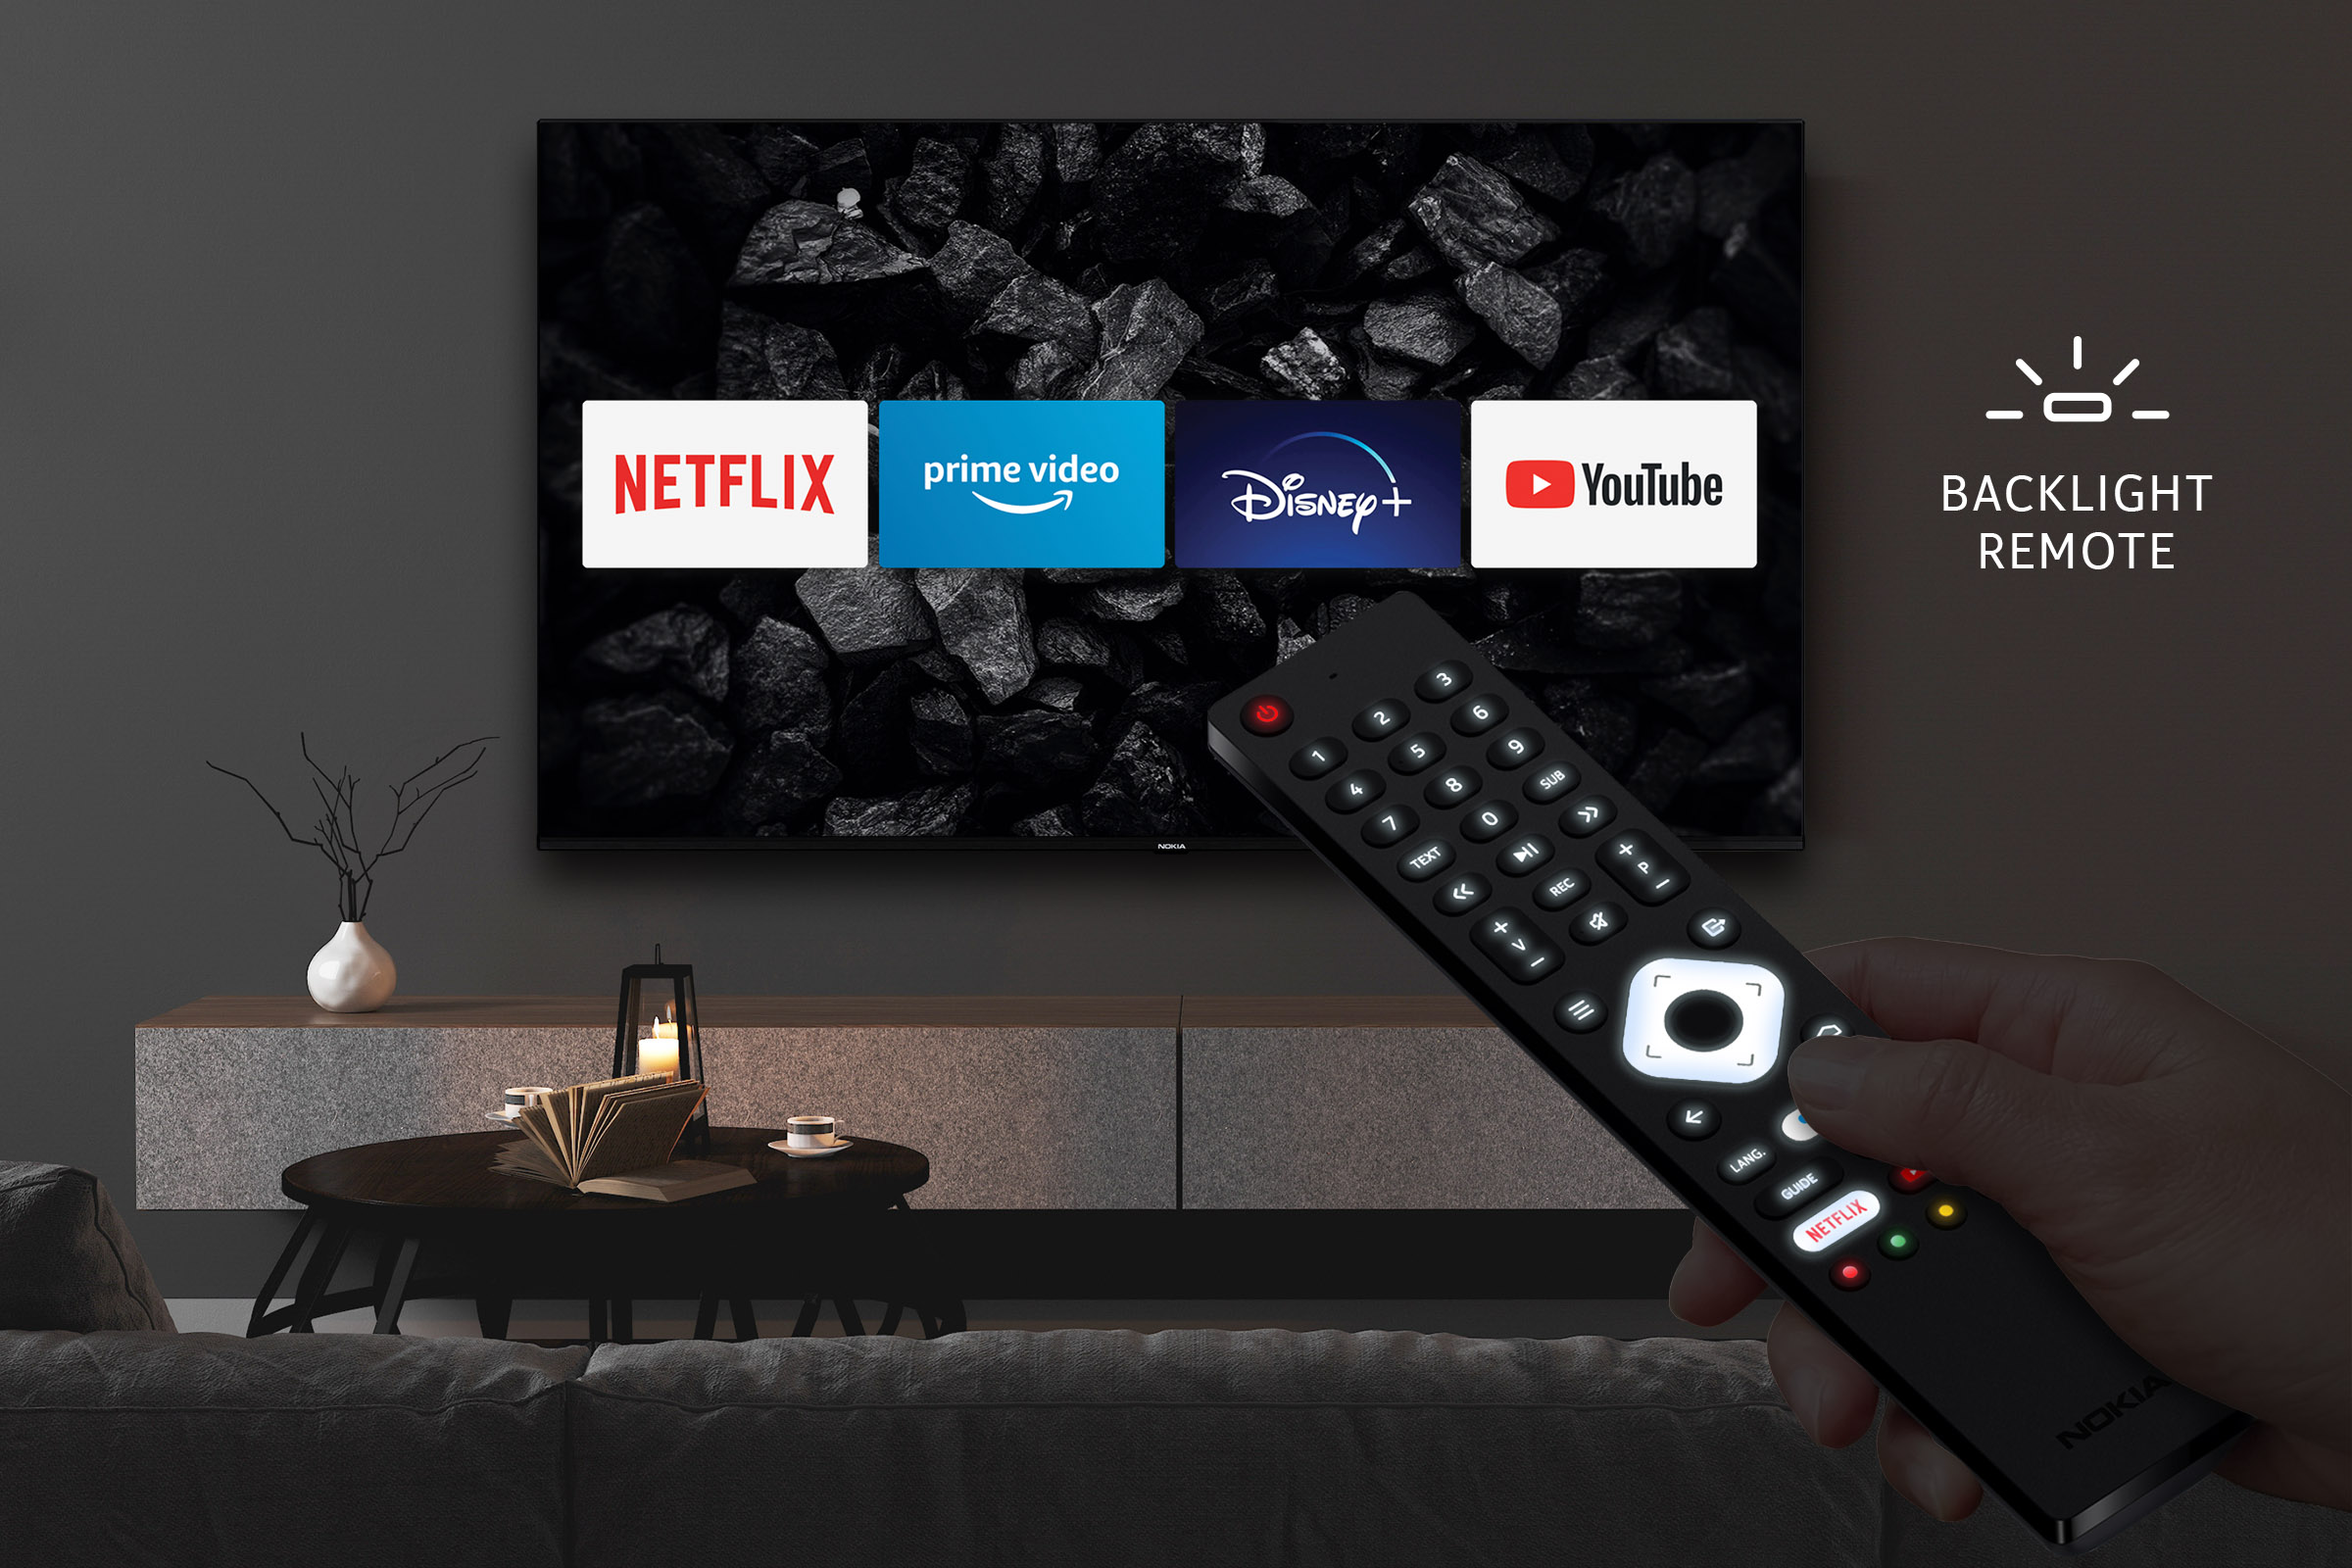 Nokia remote control for Nokia Smart TV on Android TV